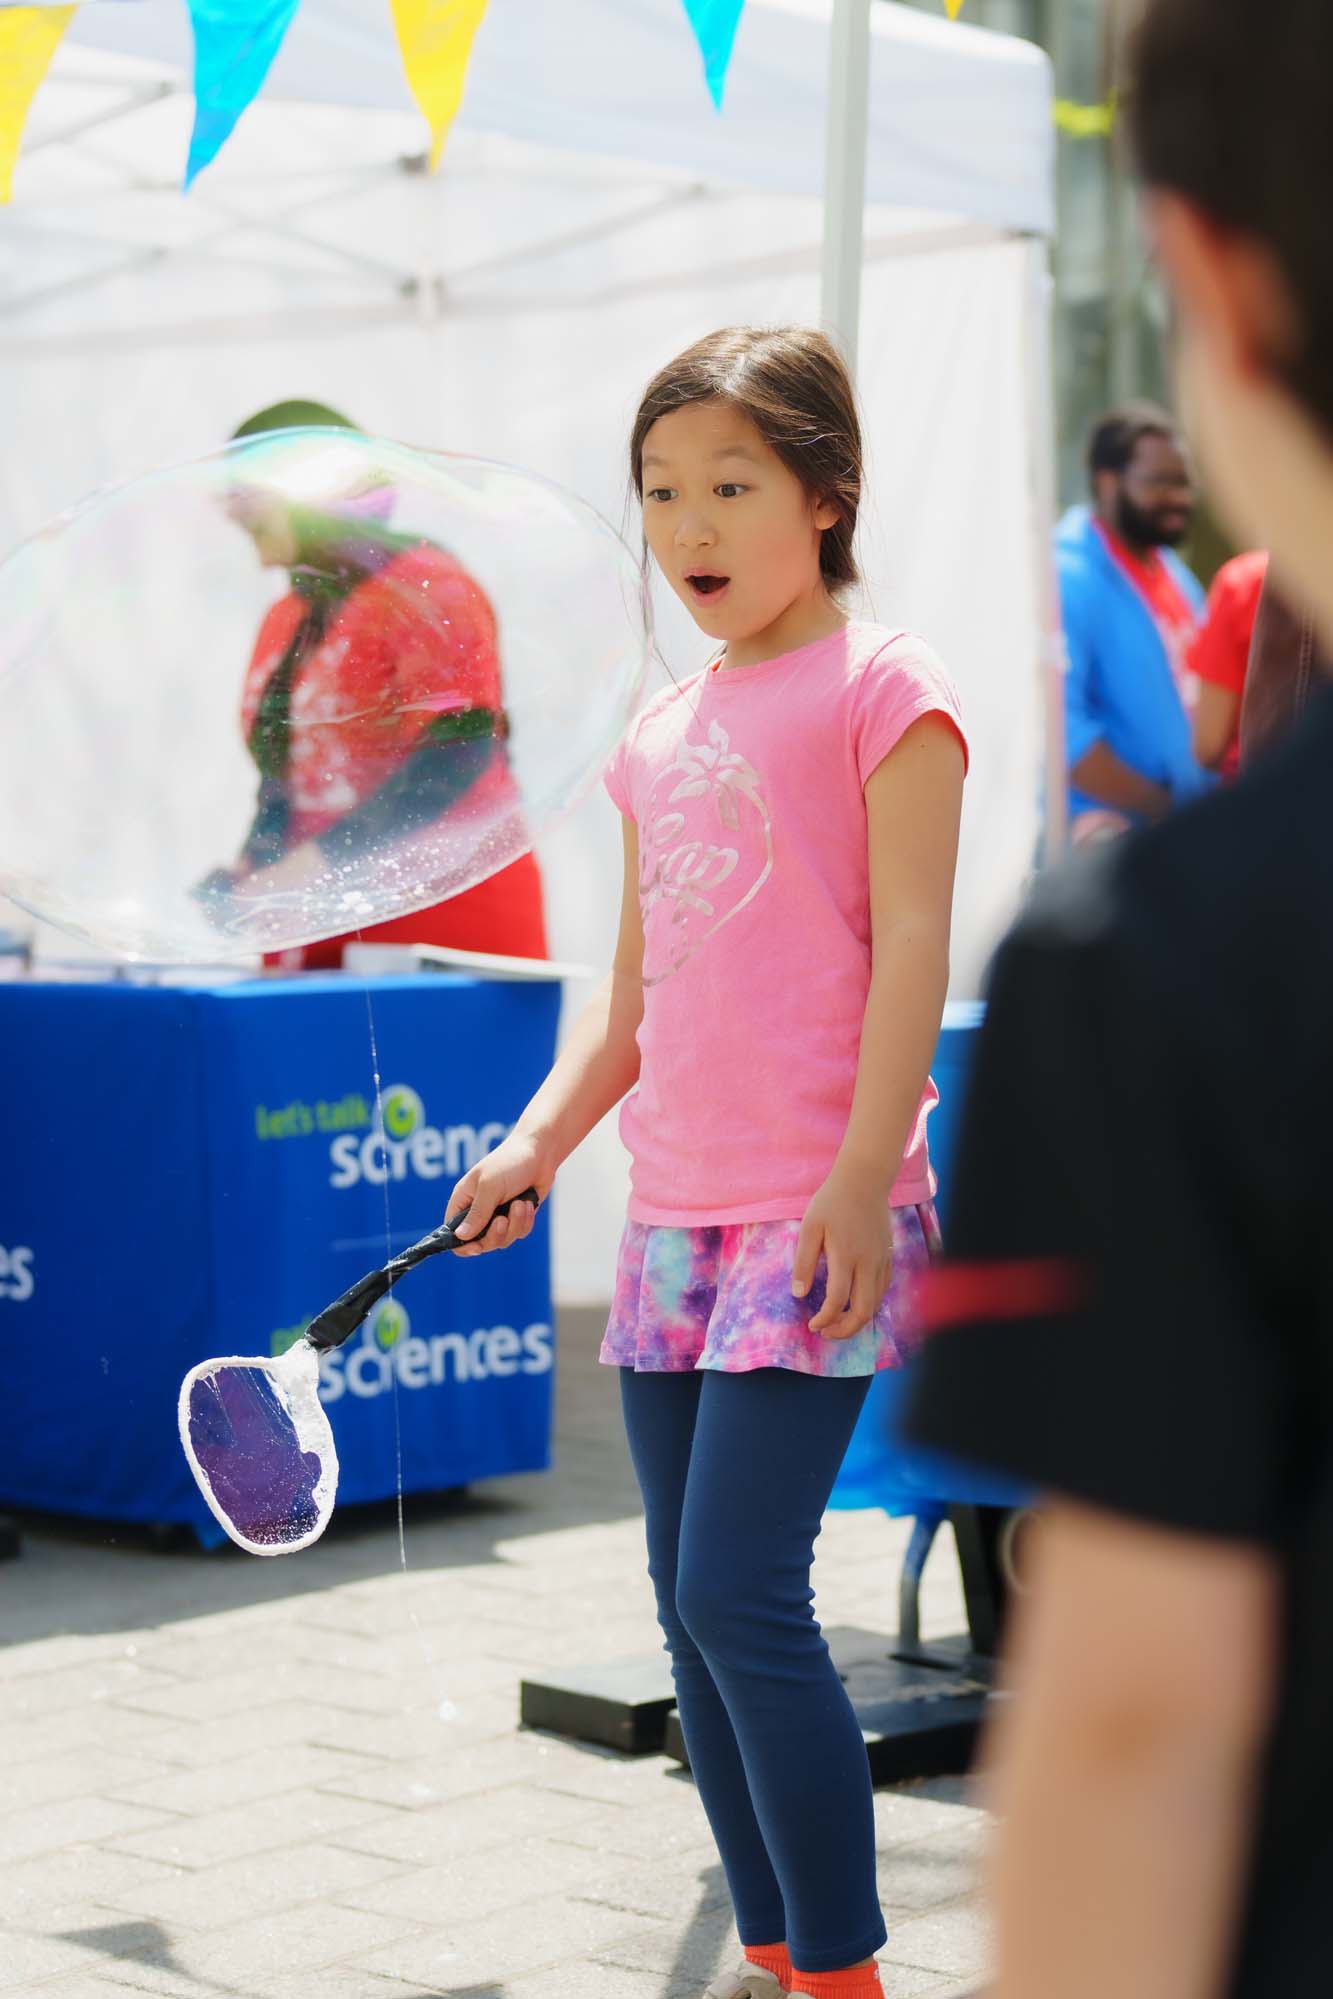 A child is amazed by the size of the big bubble she just made.